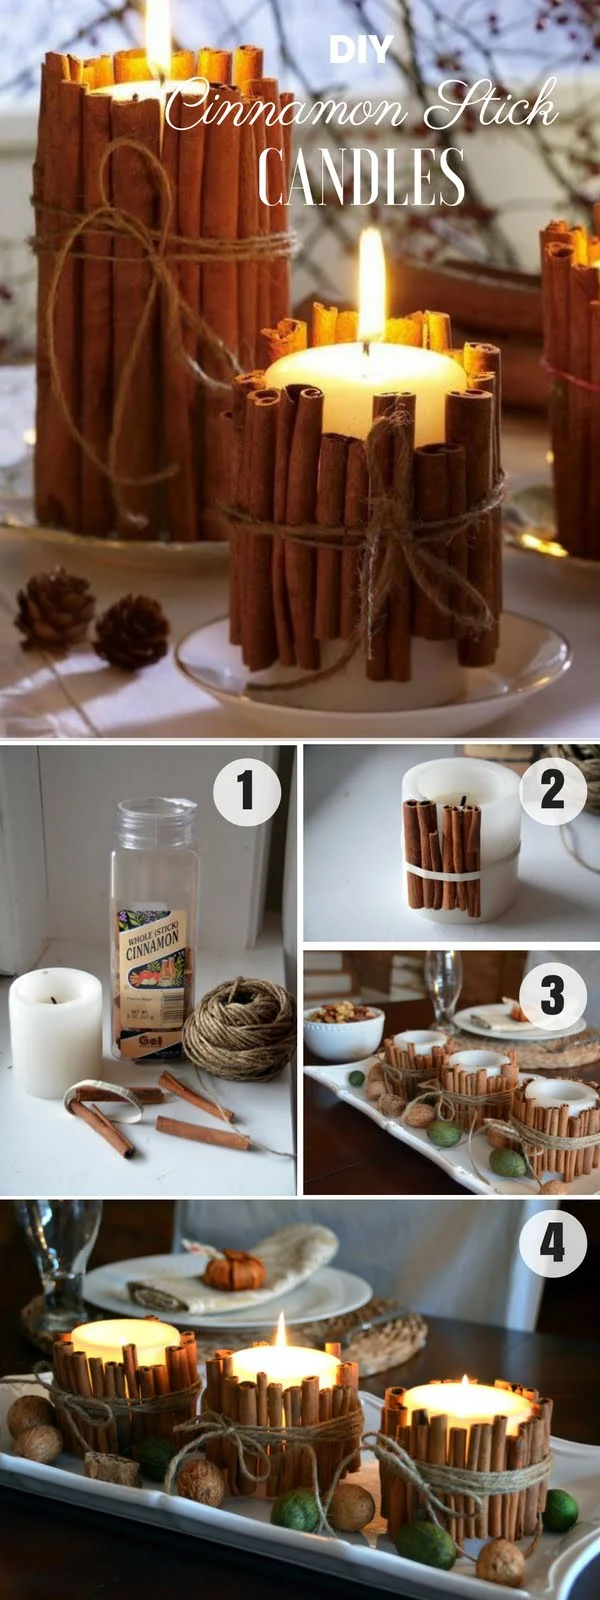 Easy to make DIY Cinnamon Stick Candles for fall decor